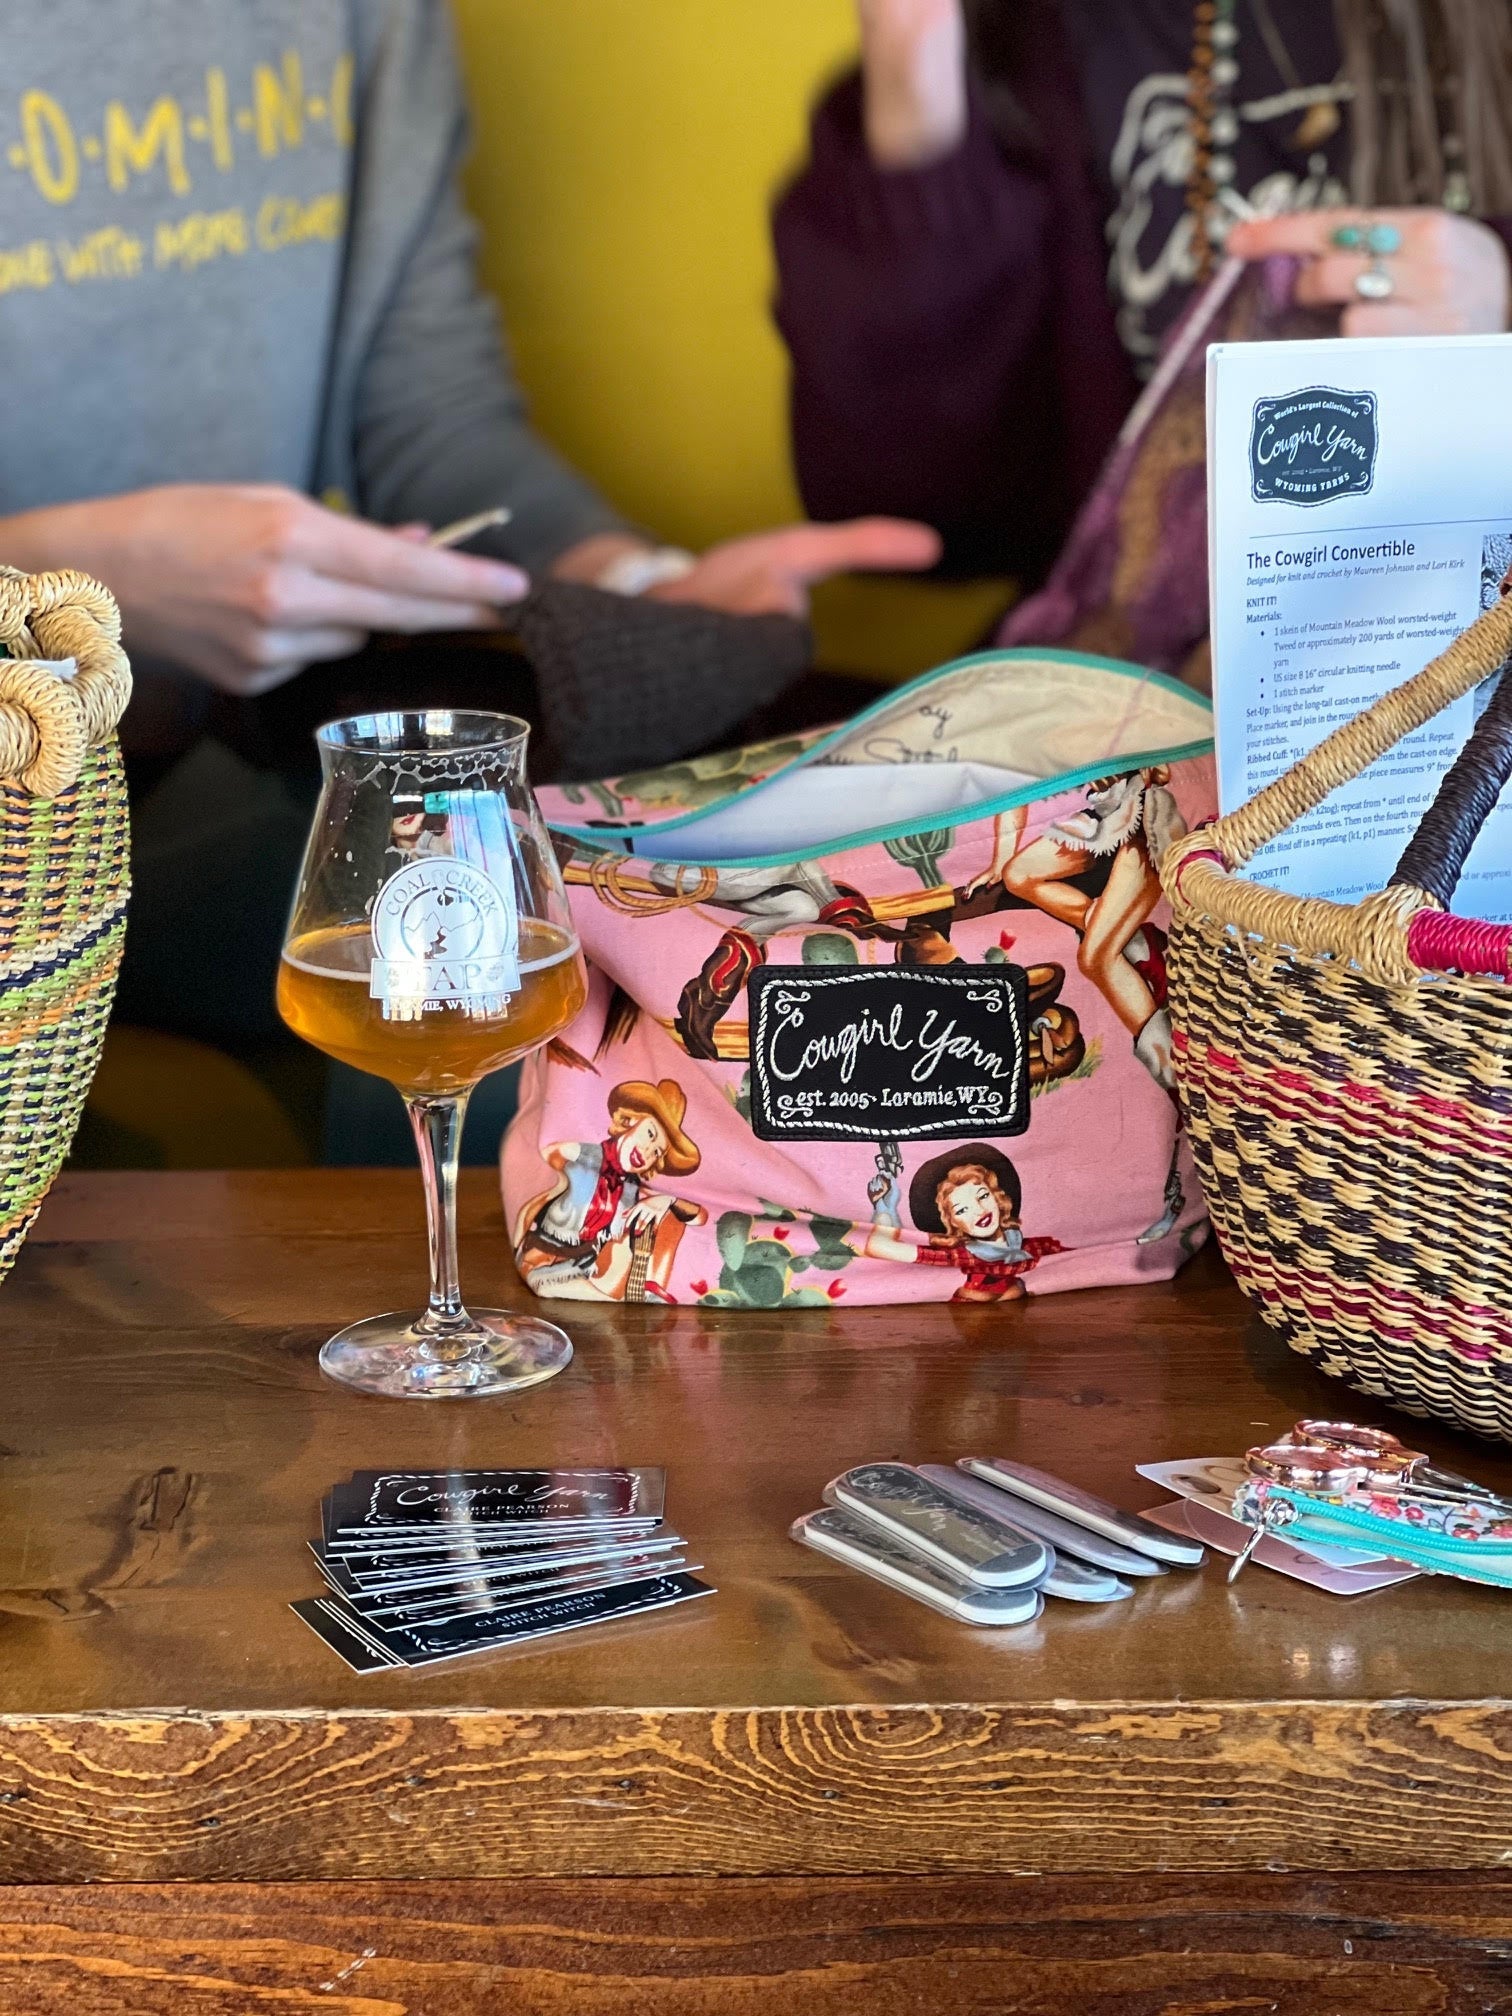 A Cowgirl Yarn tote bag, basket, and a beer in the foreground with people knitting and crocheting in the background